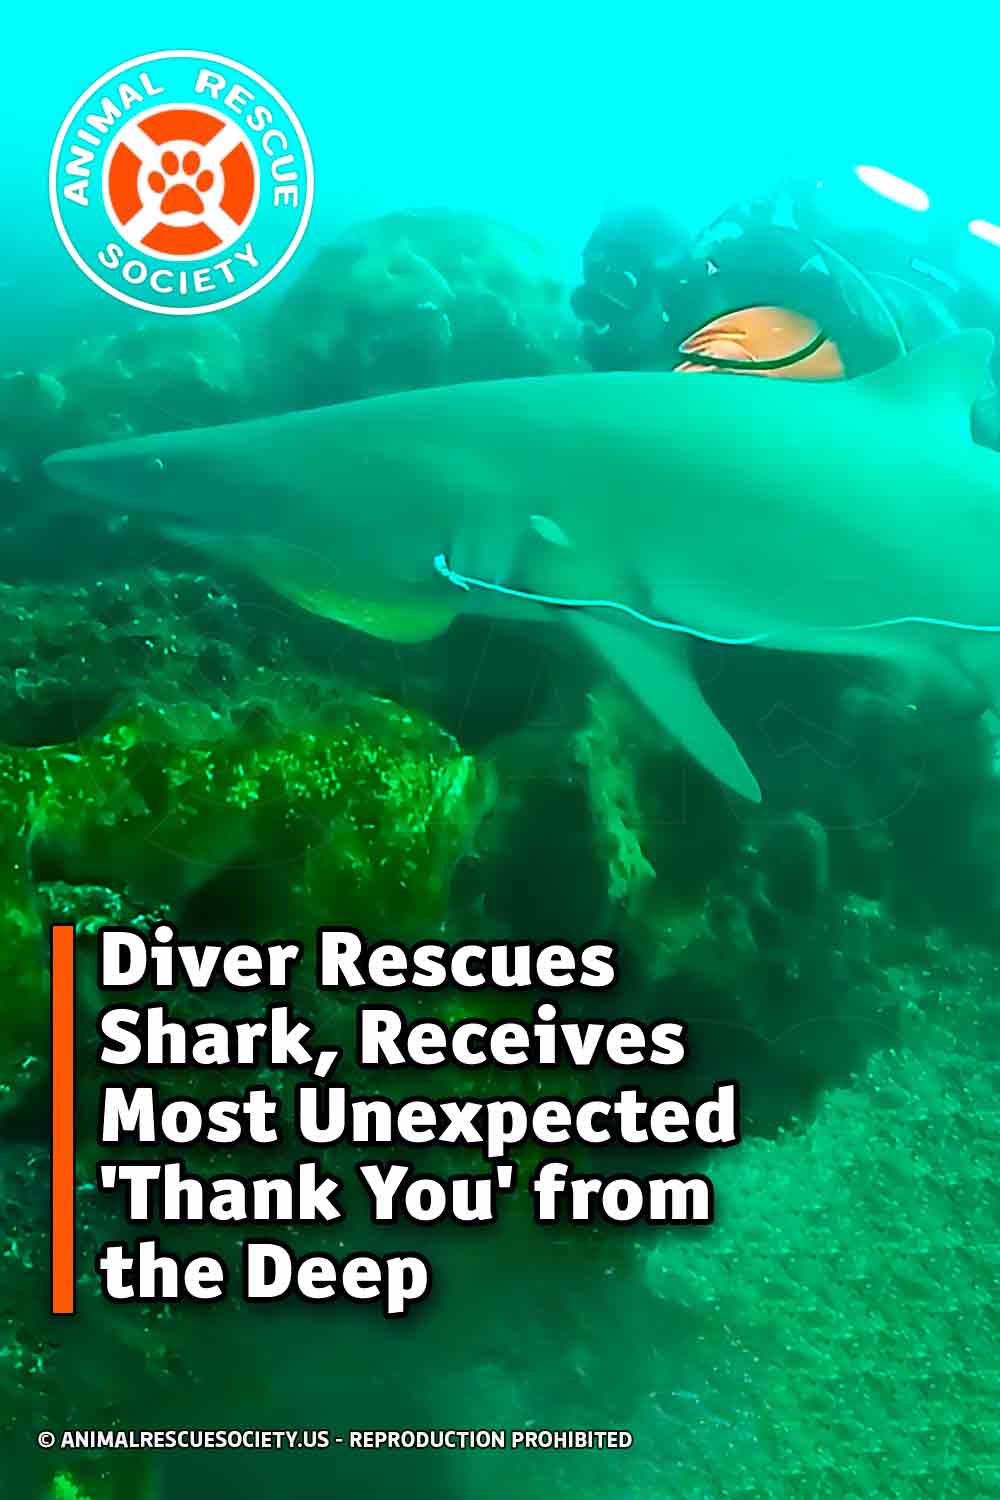 Diver Rescues Shark, Receives Most Unexpected \'Thank You\' from the Deep